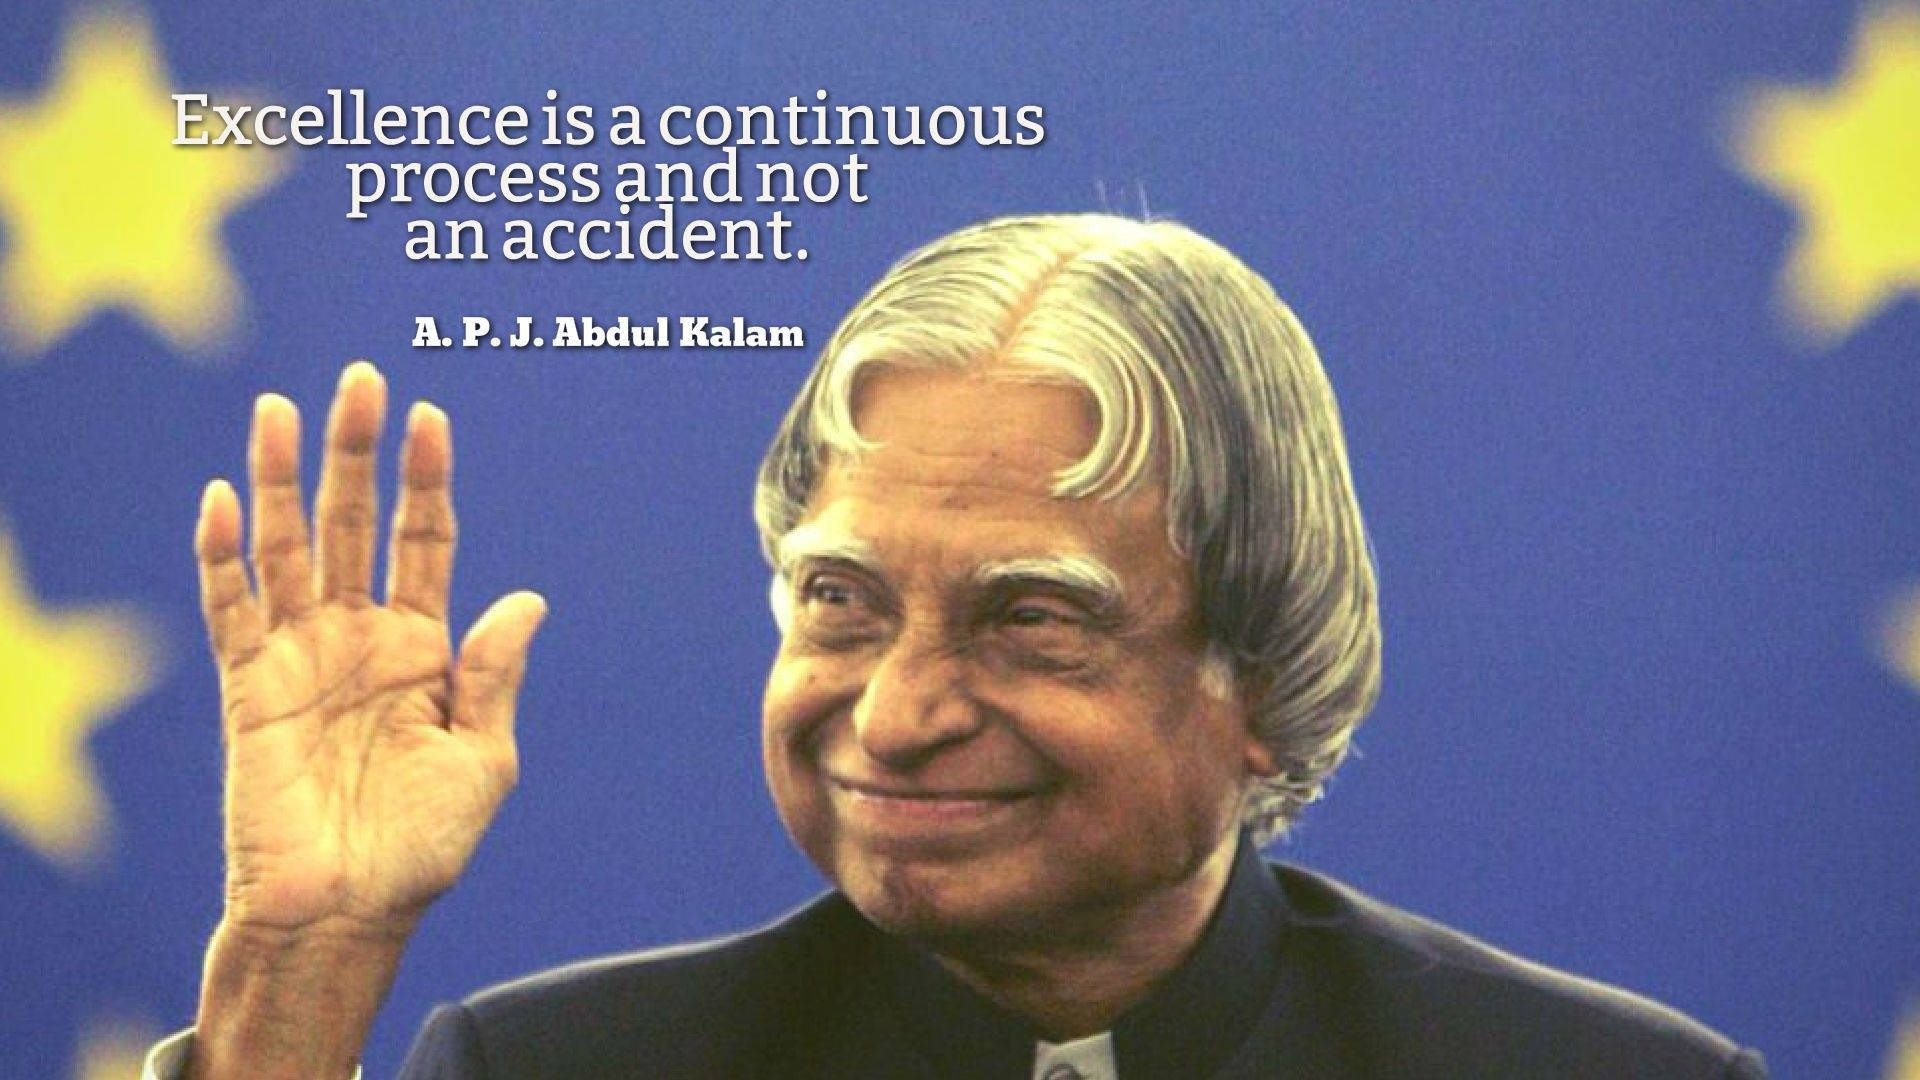 Abdul Kalam Hd Excellence Quote Background